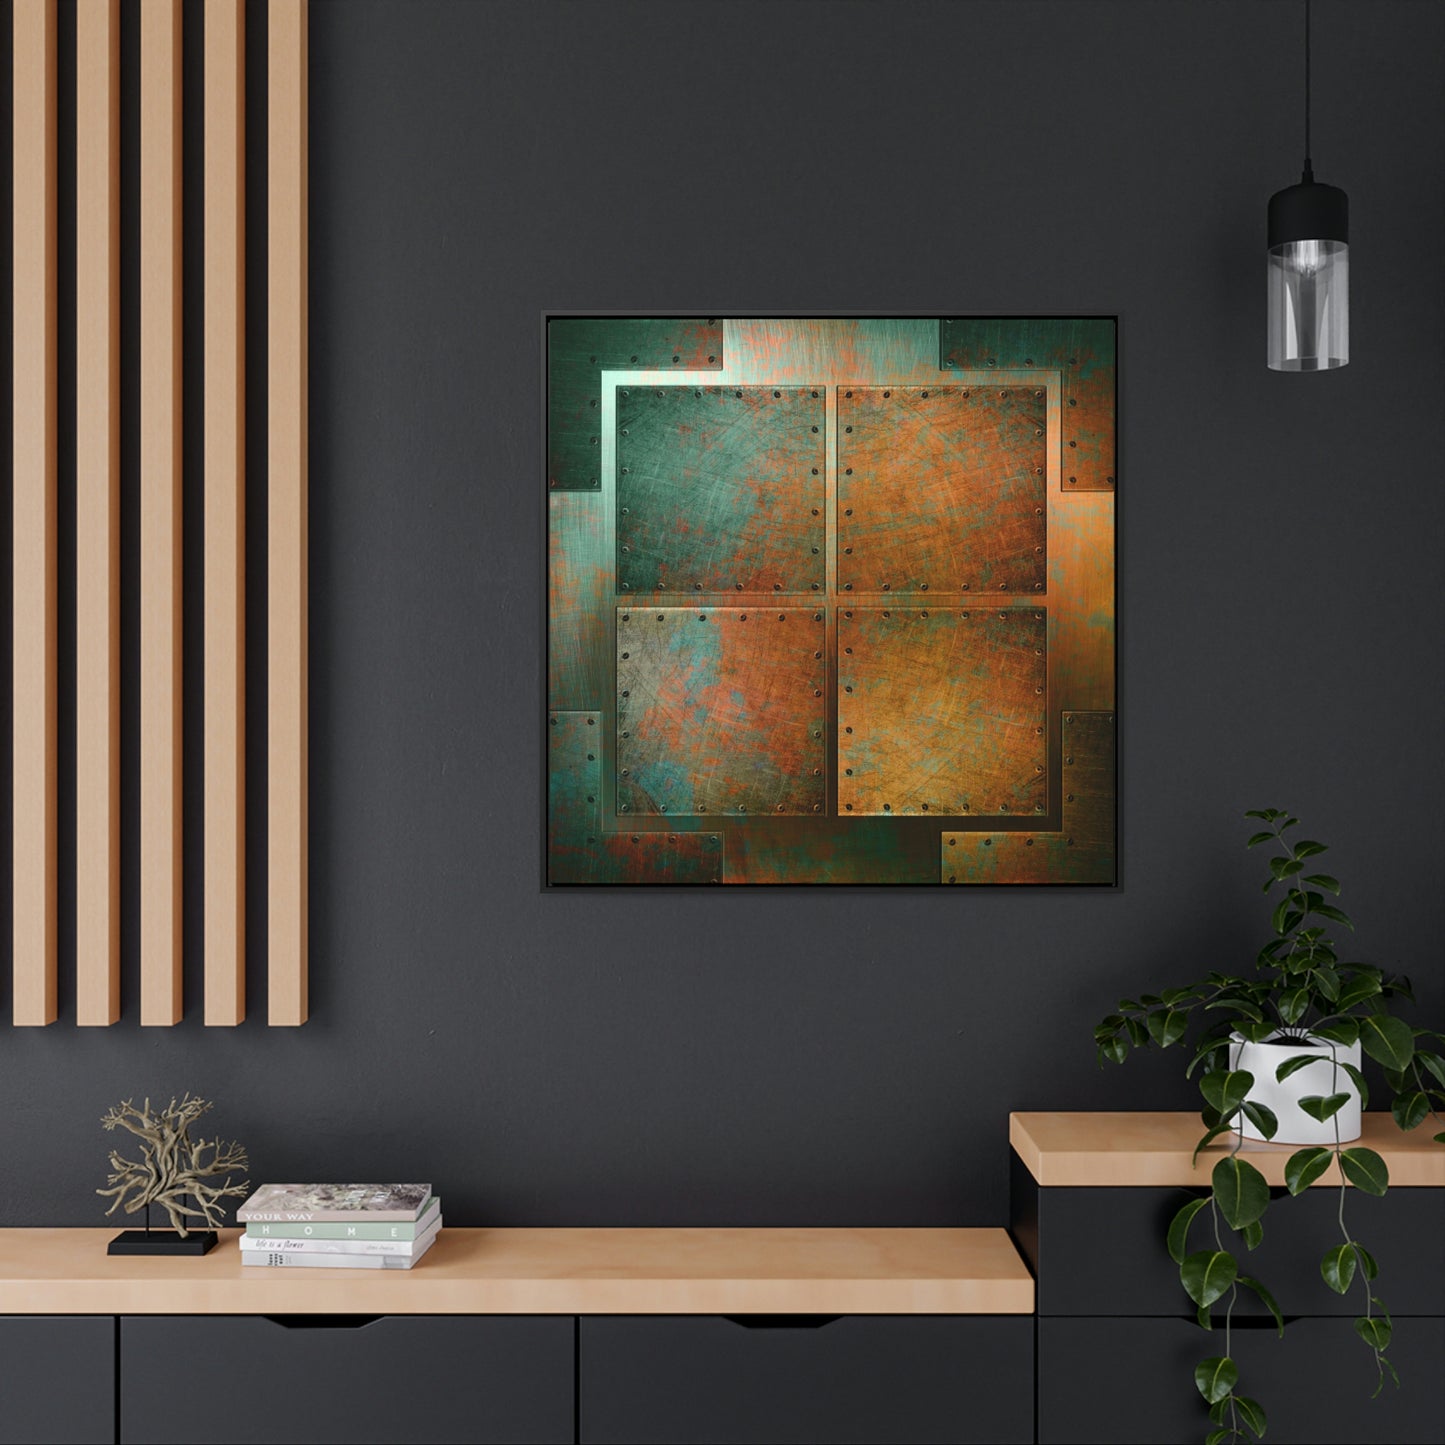 Steampunk Themed Wall Decor - Patinated, Riveted Copper Sheets Print on Canvas in a Floating Frame hung on black wall